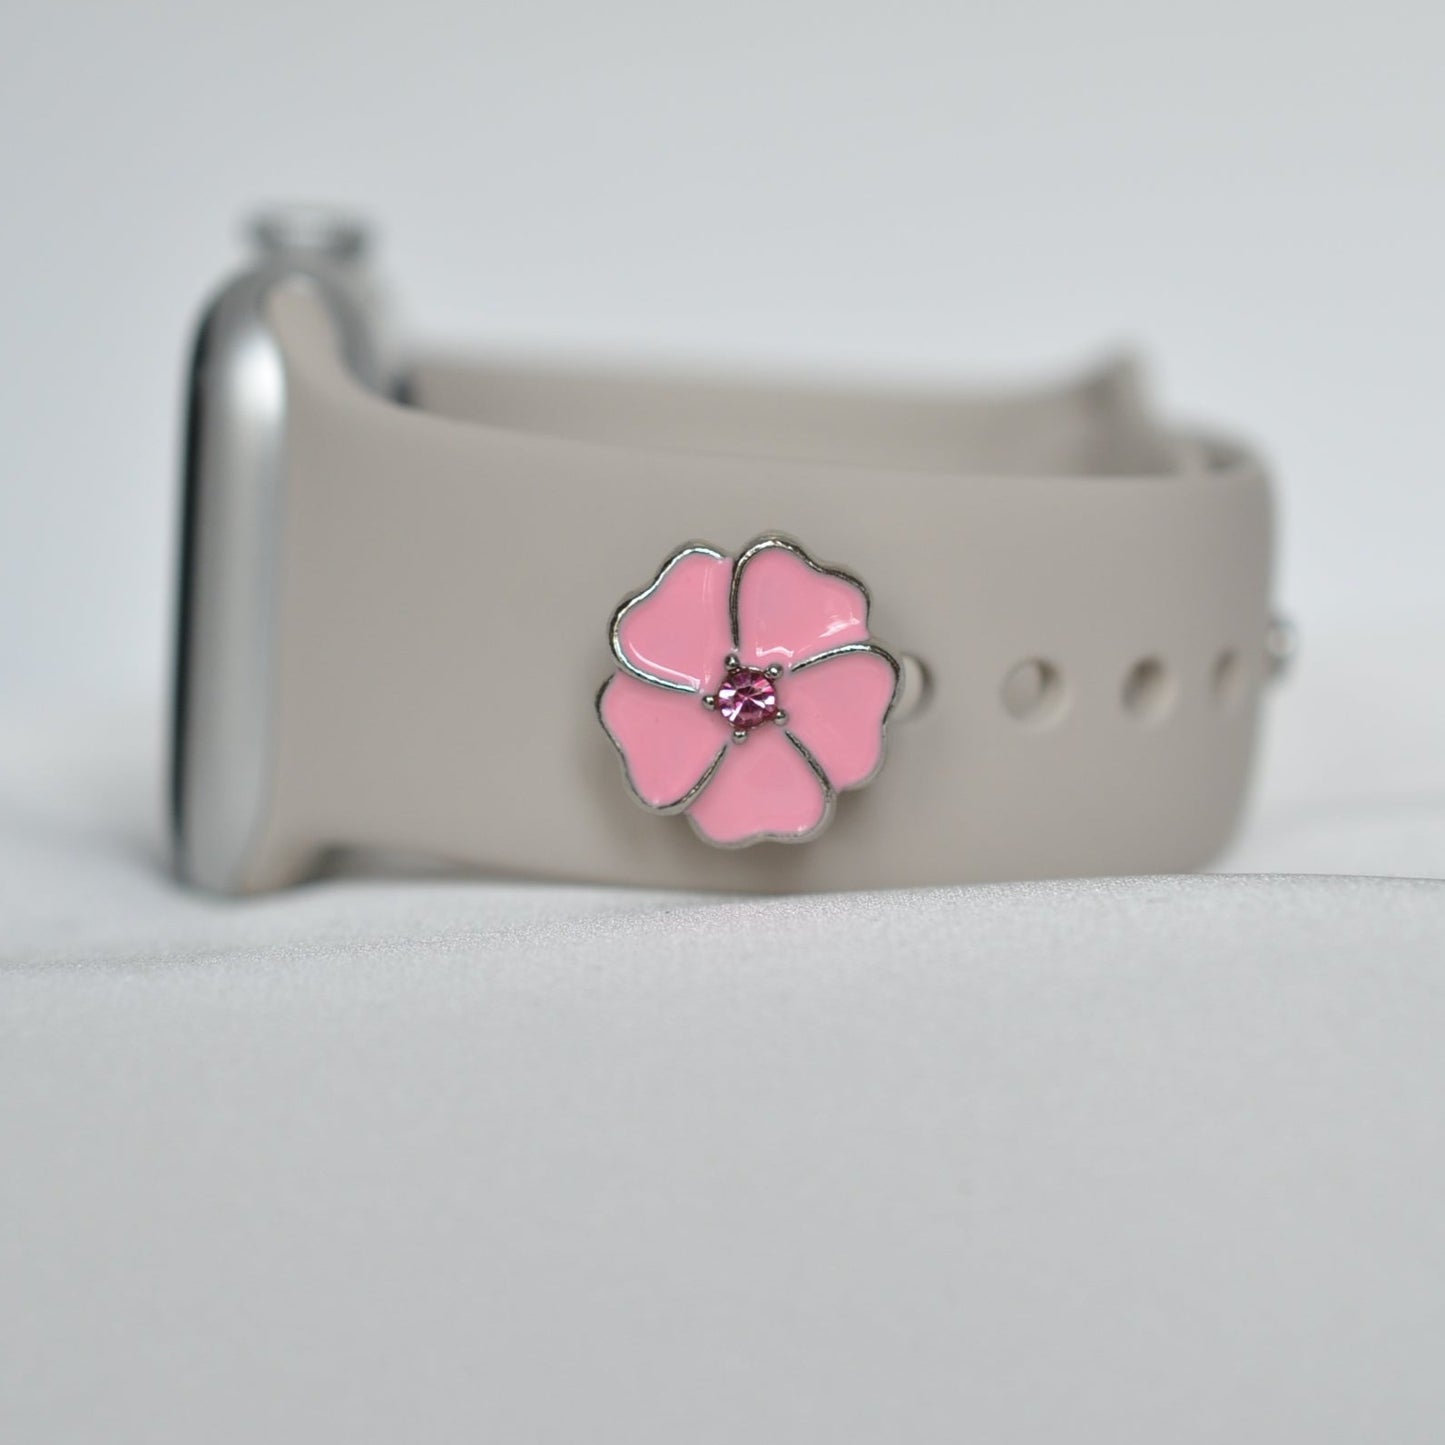 Pink Flower with Pink Center Stone Charm for Belts, Bags and Watch Bands